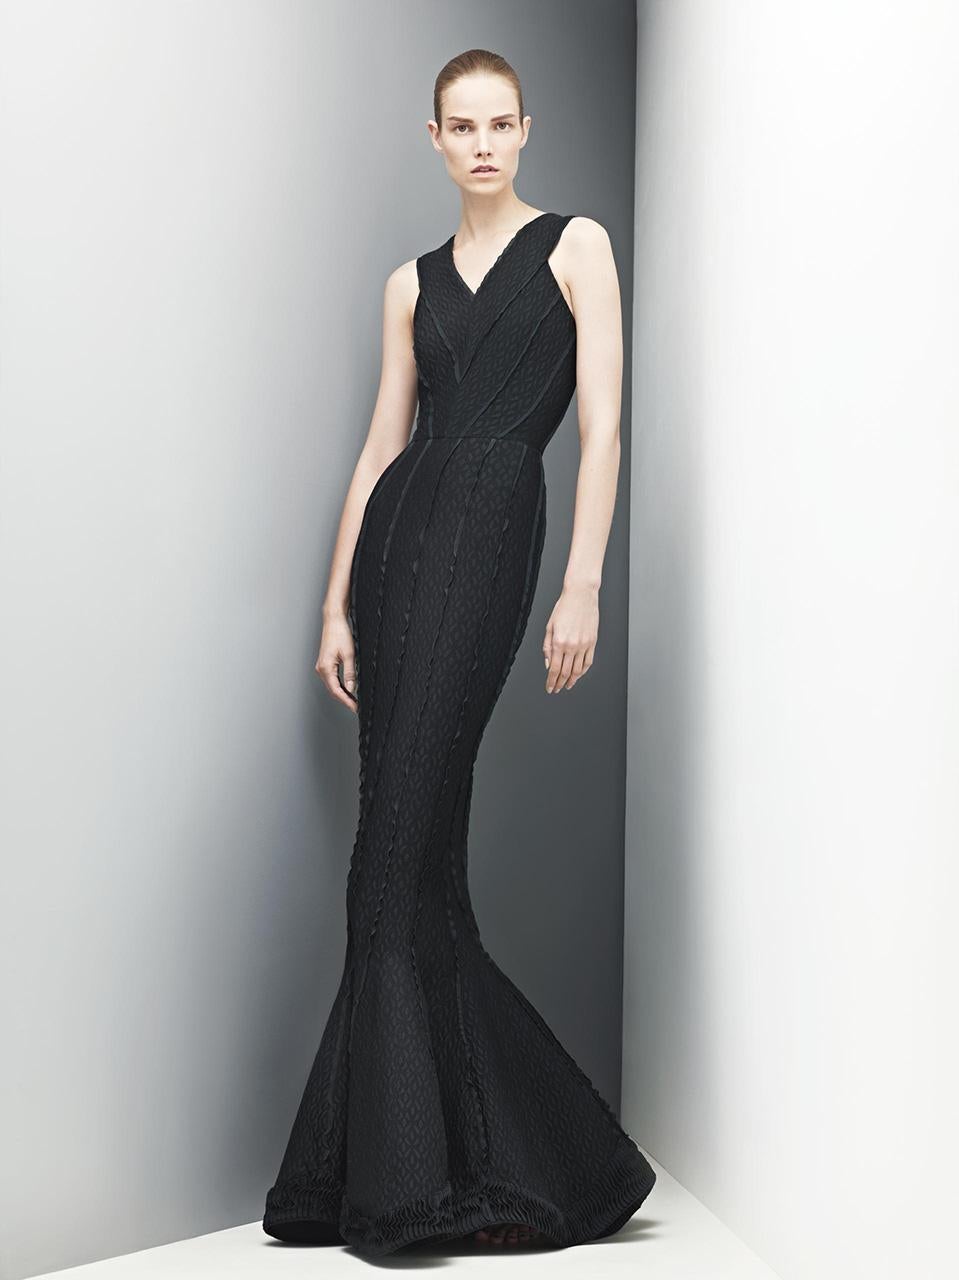 An ultra seductive and instantly recognizable Azzedine Alaia black cutwork patterned metallic accented stretch knit floor-length gown dating back to his 2012 fall-winter collection. Alaïa introduced the world to the 'body' with his ultra flattering